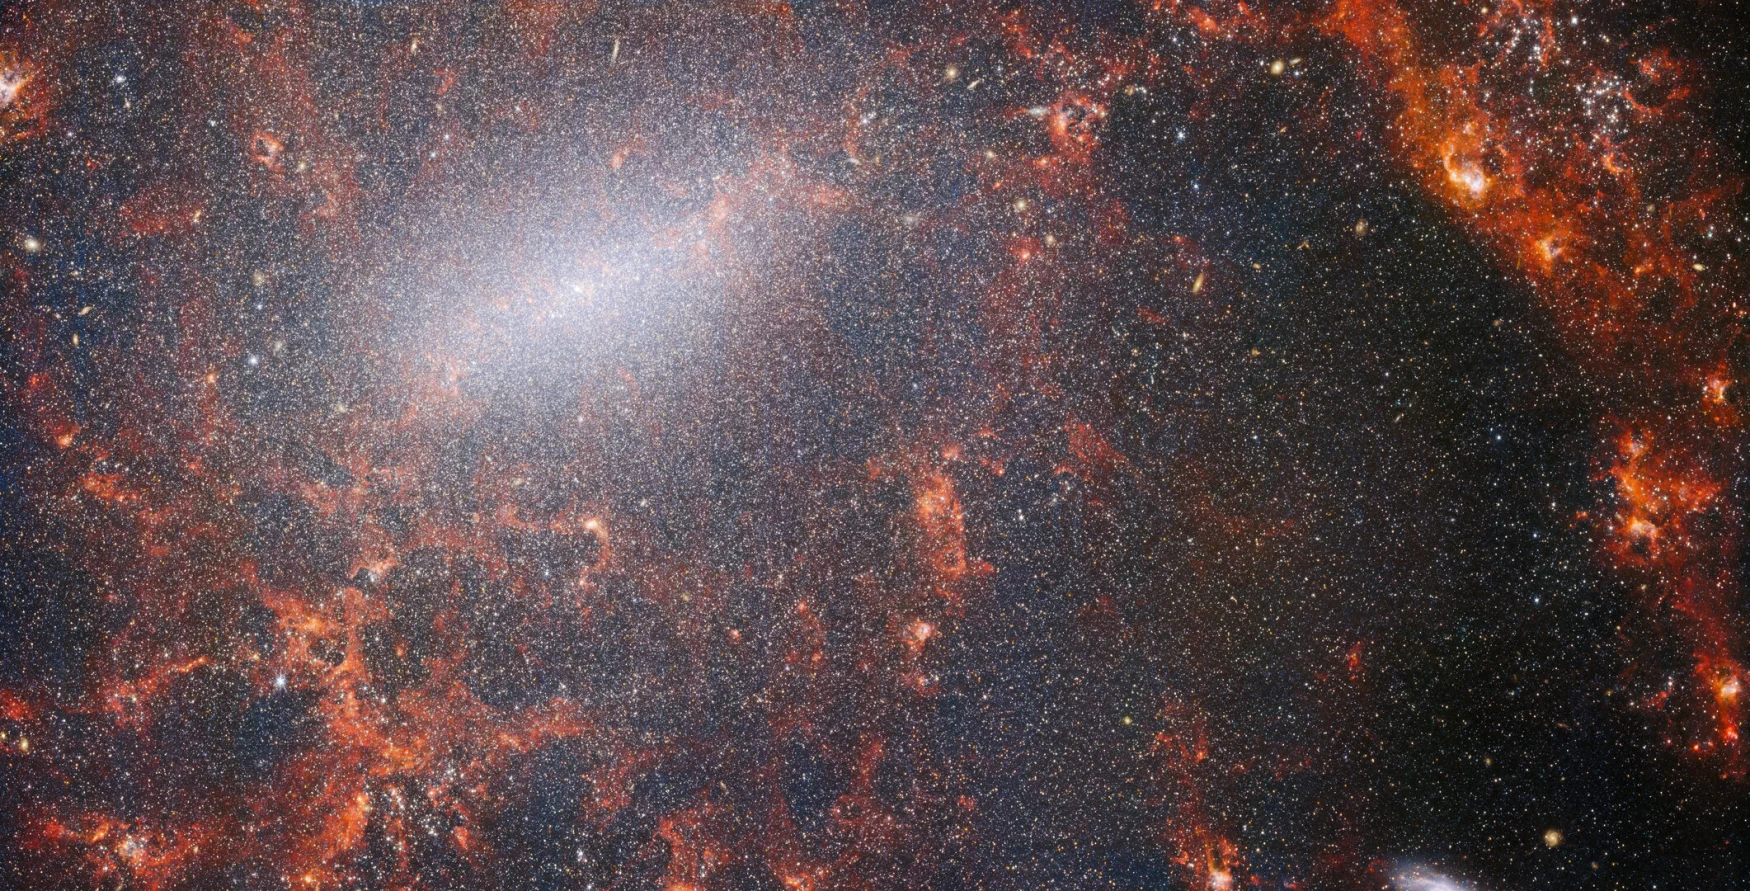 Fine filaments of dust and bright star clusters are seen across this image from the NASA/ESA/CSA James Webb Space Telescope.  This view from Webbâ€™s NIRCam instrument is studded with the galaxy's massive cluster of stars, the most densely packed along its bright central bar, along with blazing red clouds of gas illuminated by the young stars within.  These twinkling stars belong to barred spiral galaxy NGC 5068, which lies about 17 million light-years from Earth in the constellation Virgo.  This image of NGC 5068 is part of a campaign to create an astronomy treasure trove, a repository for observations of star formation in nearby galaxies.  Previous gems from this collection can be seen here and here.  These observations are particularly valuable to astronomers for two reasons.  The first is that star formation underpins many areas in astronomy, from the physics of weak interstellar plasmas to the evolution of entire galaxies.  By observing star formation in nearby galaxies, astronomers hope to start a major scientific advance with some of the first data available from Webb.  The second reason is that Webb's observations are based on other studies using telescopes including the NASA/ESA Hubble Space Telescope and some of the most capable ground-based observatories in the world.  Webb collected images of 19 nearby star-forming galaxies, which astronomers were then able to combine with Hubble's catalogs of 10,000 star clusters, spectrally mapped 20,000 star emission nebulae from the Very Large Telescope (VLT), and observed 12,000 from dark nebulae.  , dense molecular clouds identified by the Atacama Large Millimeter/Submillimeter Array (ALMA).  These observations span the electromagnetic spectrum and give astronomers an unprecedented opportunity to piece together the details of star formation.  This near-infrared image of the galaxy is filled with the massive cluster of ancient stars that make up the core of NGC 5068. NIRCam's sharp view allows astronomers to peer through the galaxy's gas and dust to examine its stars more closely.  Along the path of the spiral arms are dense, bright clouds of dust: these are H II regions, clusters of hydrogen gas where new stars are forming.  Active, energetic stars ionize the hydrogen around them, which, when combined with emission of hot dust, produces this reddish glow.  H II regions make a great target for astronomers, and Webb's instruments are the perfect tools for examining them, resulting in this image. [Image Description: A close-in image of a spiral galaxy, showing its core and part of a spiral arm. At this distance thousands upon thousands of tiny stars that make up the galaxy can be seen. The stars are most dense in a whitish bar that forms the core, and less dense out from that towards the arm. Bright red gas clouds follow the twist of the galaxy and the spiral arm.] Links NGC 5068 (NIRCam + MIRI Image) 